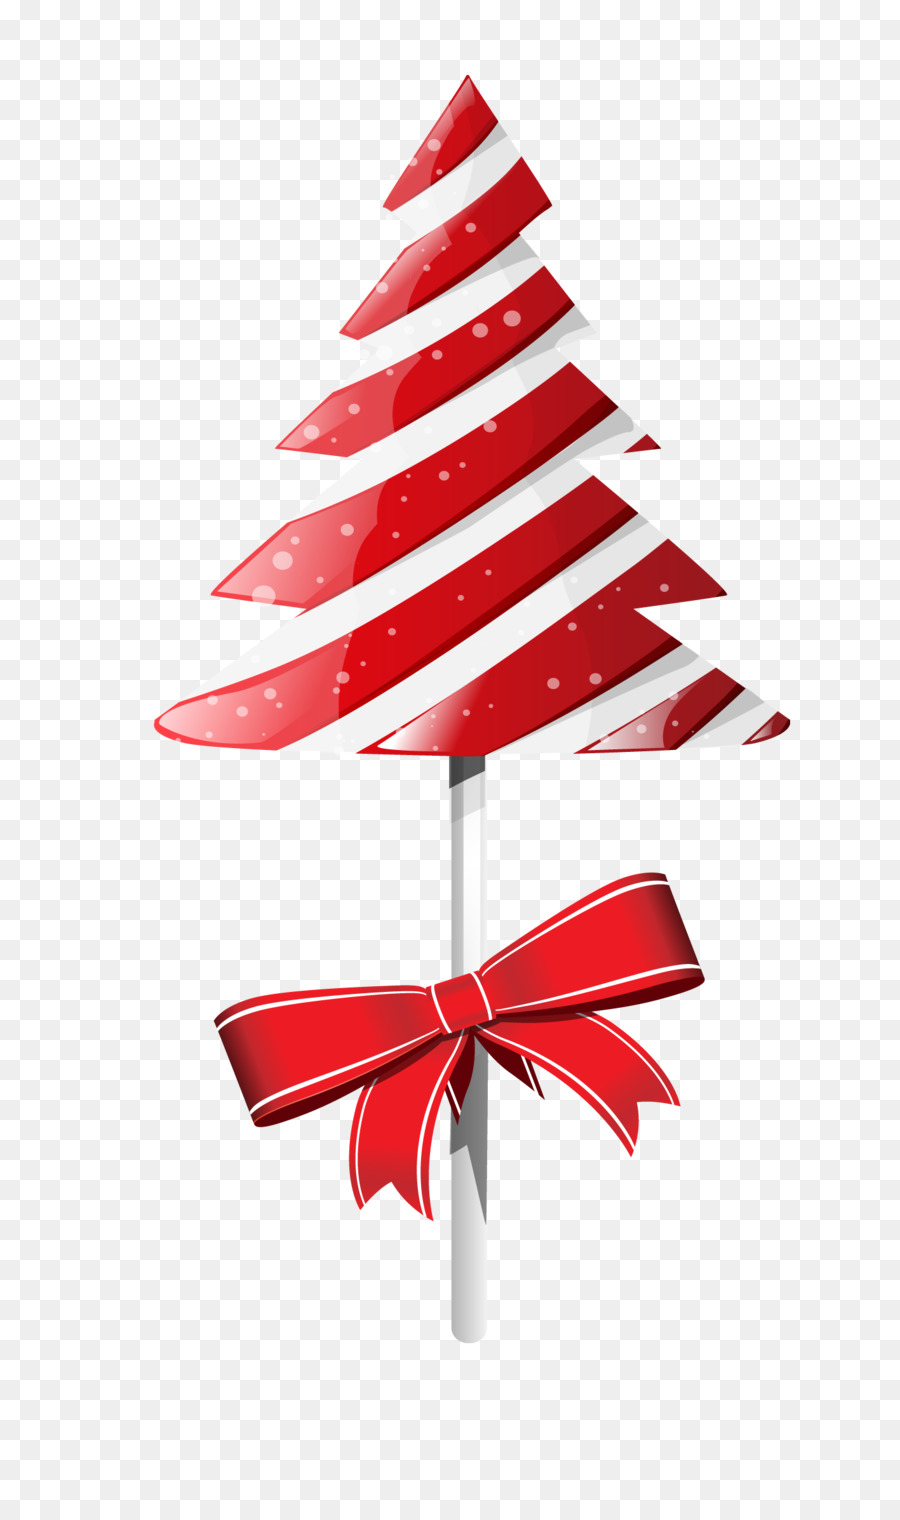 Candy cane Christmas tree - Christmas candy